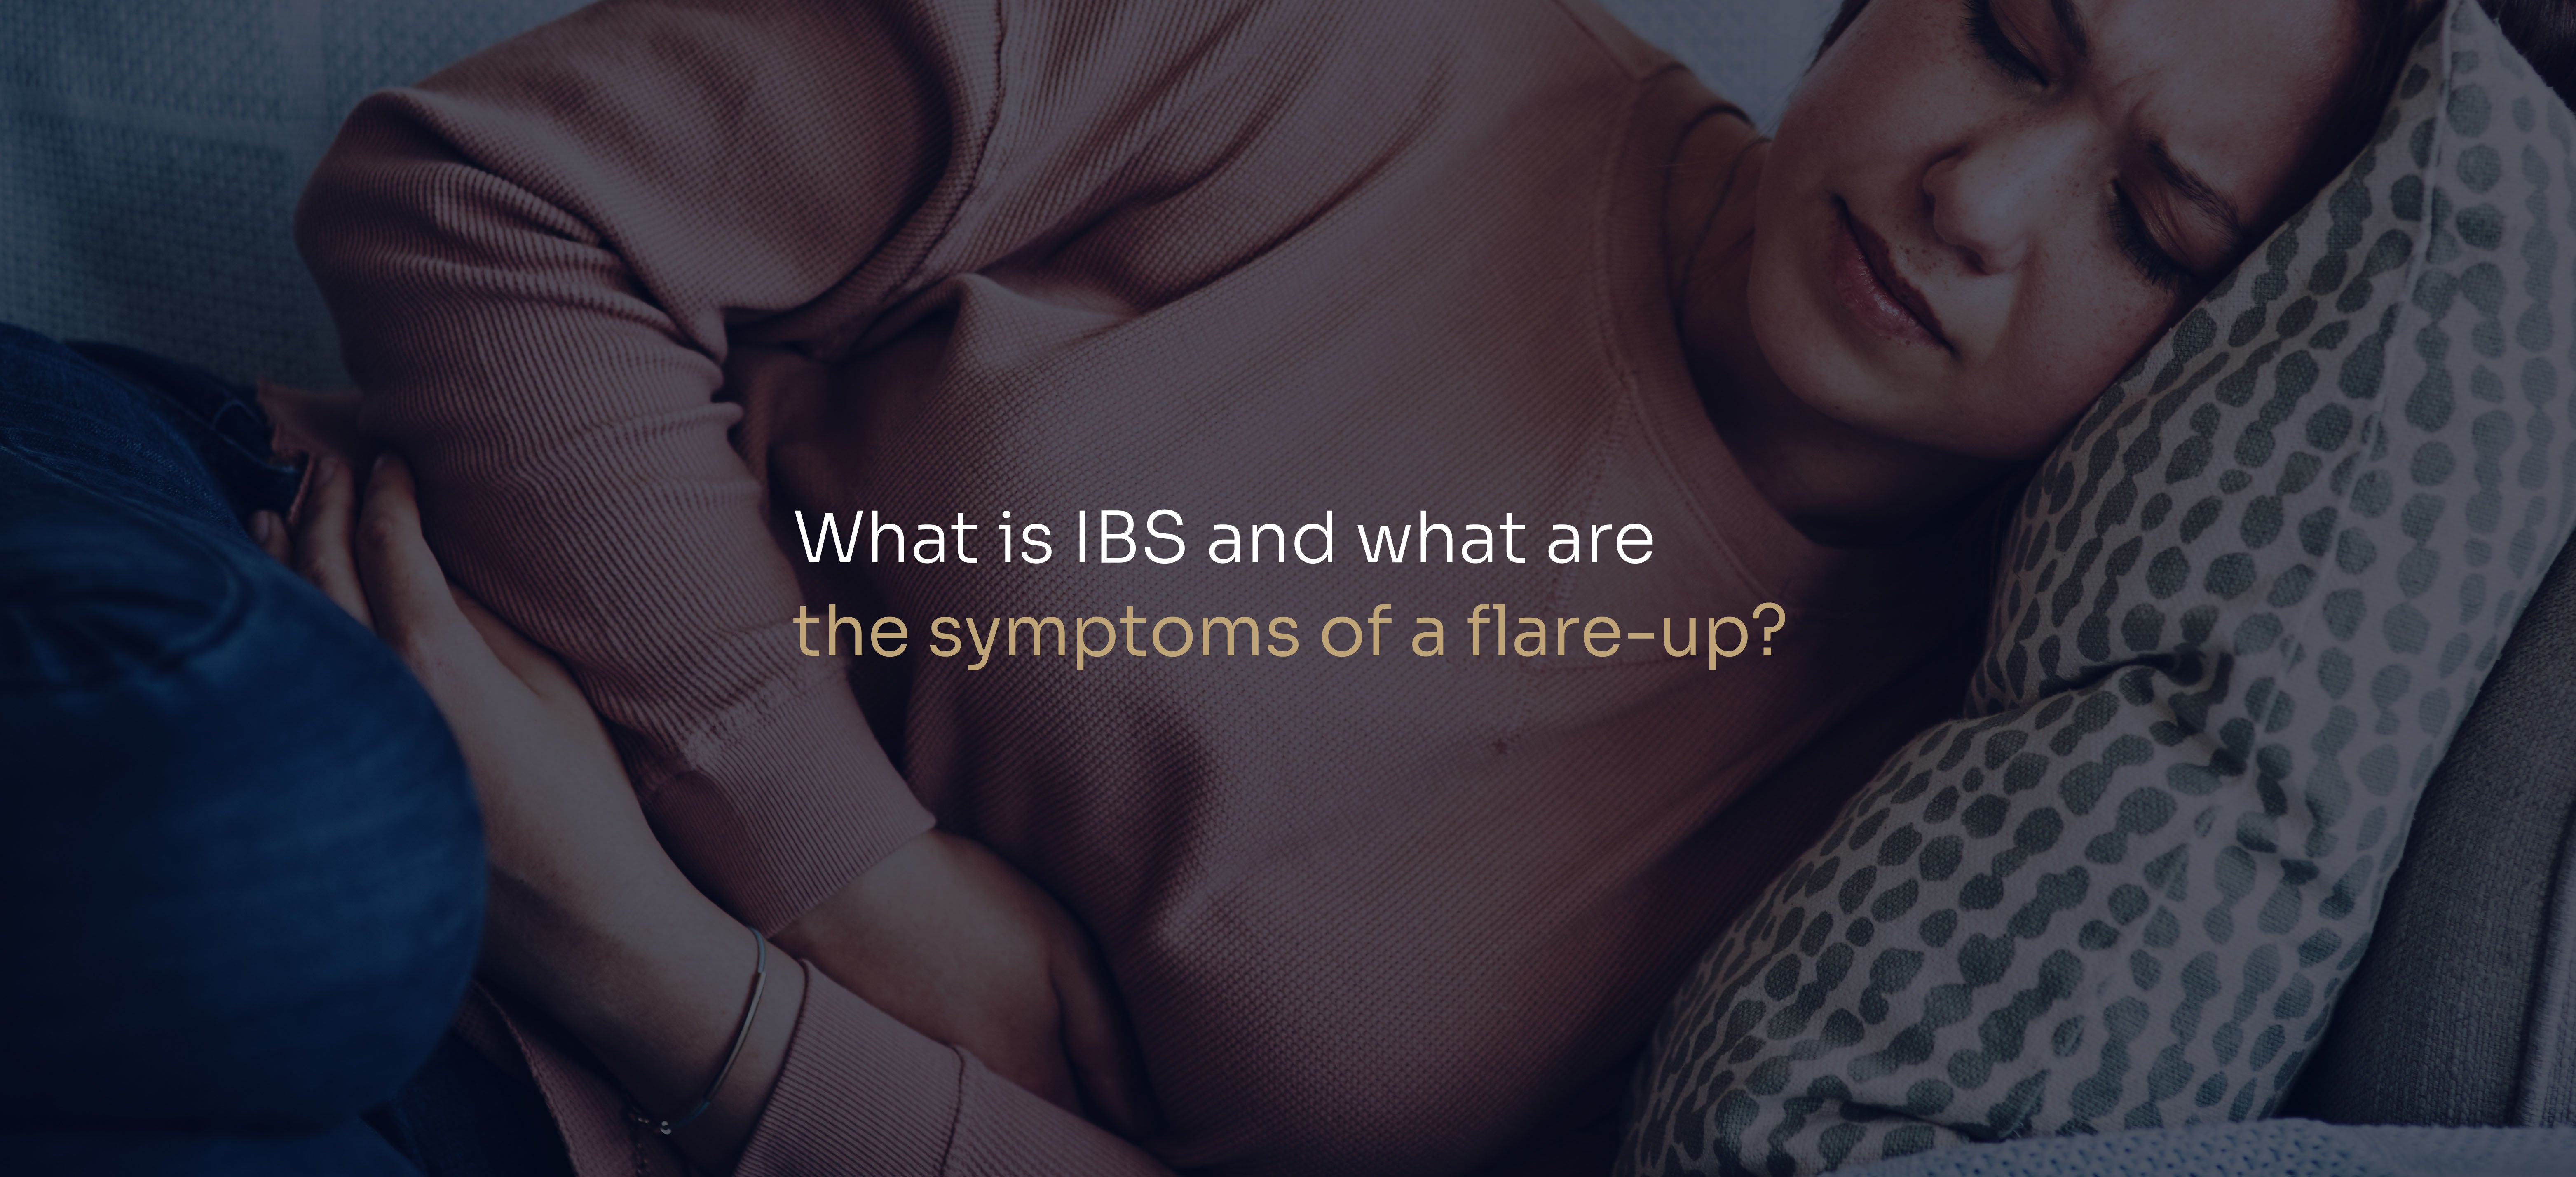 What is IBS and what are the symptoms of a flare-up